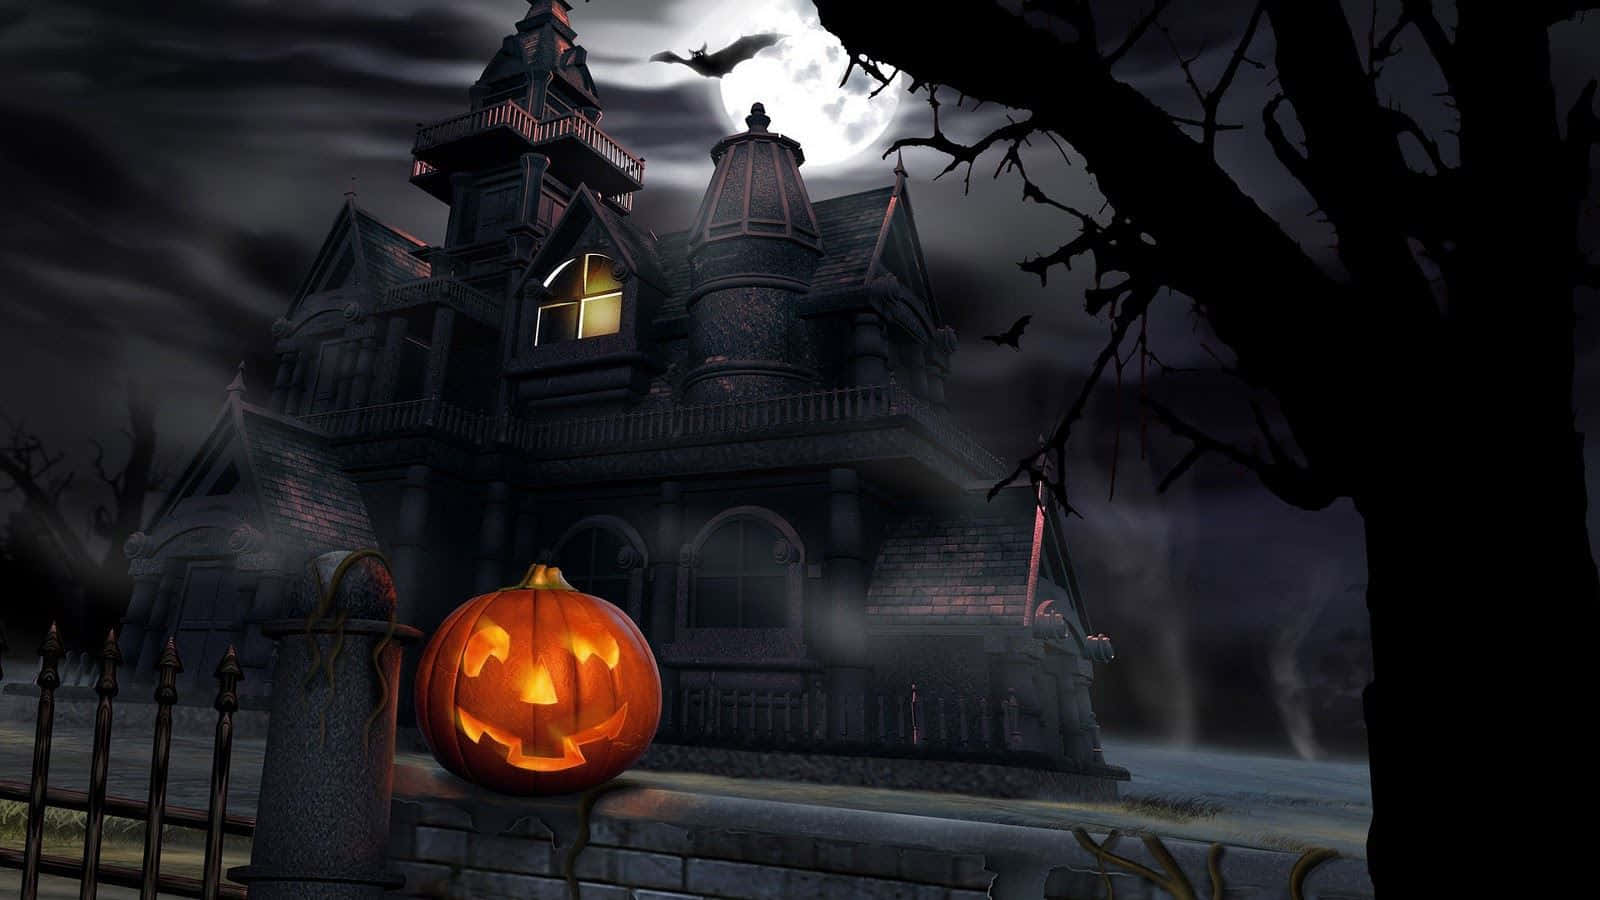 Get Into The Halloween Spirit With This Spooky MacBook Wallpaper